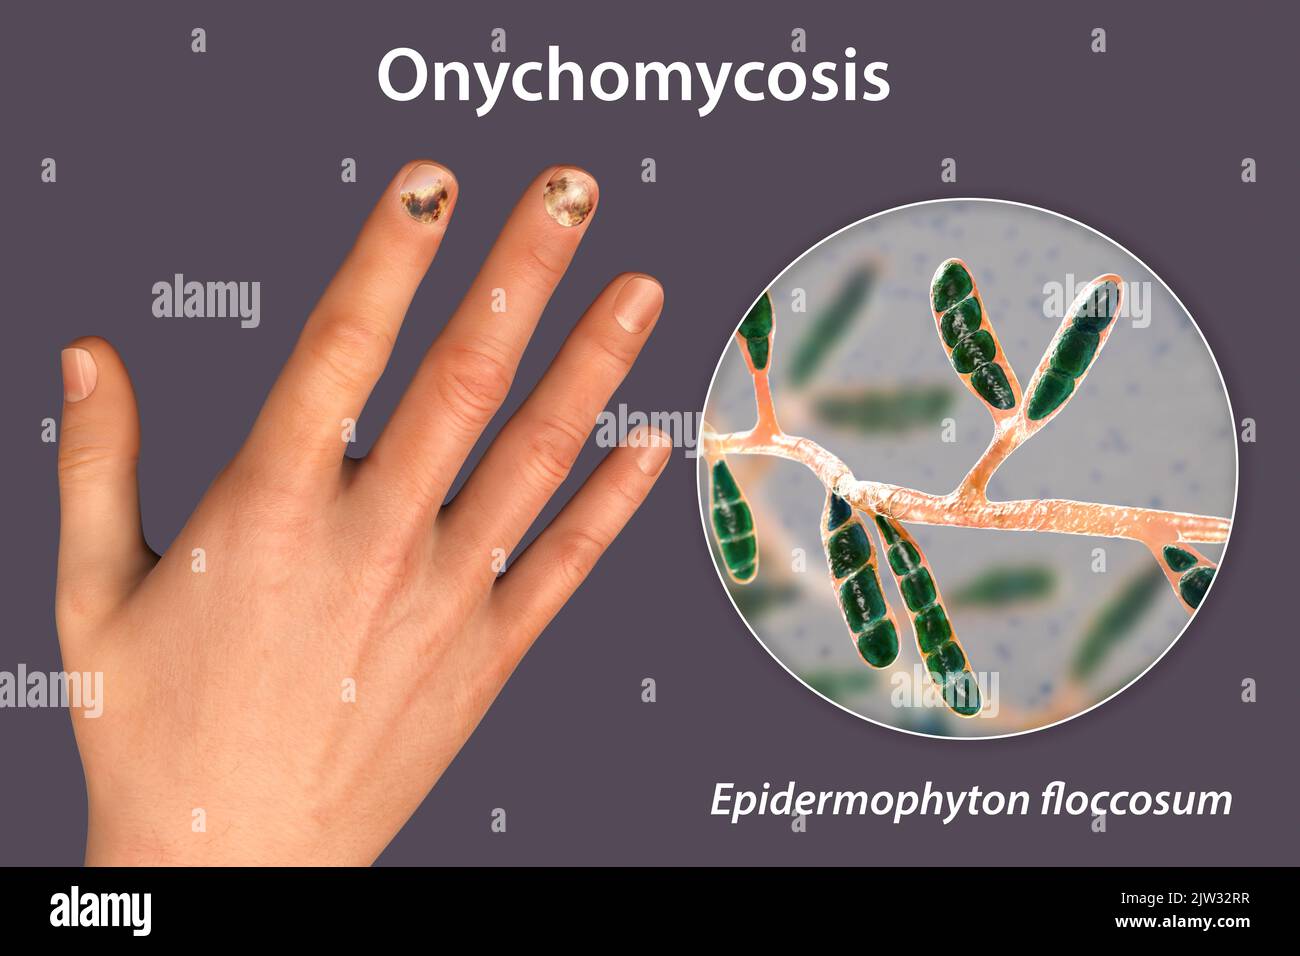 Illustration of a fungal nail infection showing a human hand with onychomycosis and a close-up view of Epidermophyton floccosum fungi, one of the causative agents of nail infections. Stock Photo